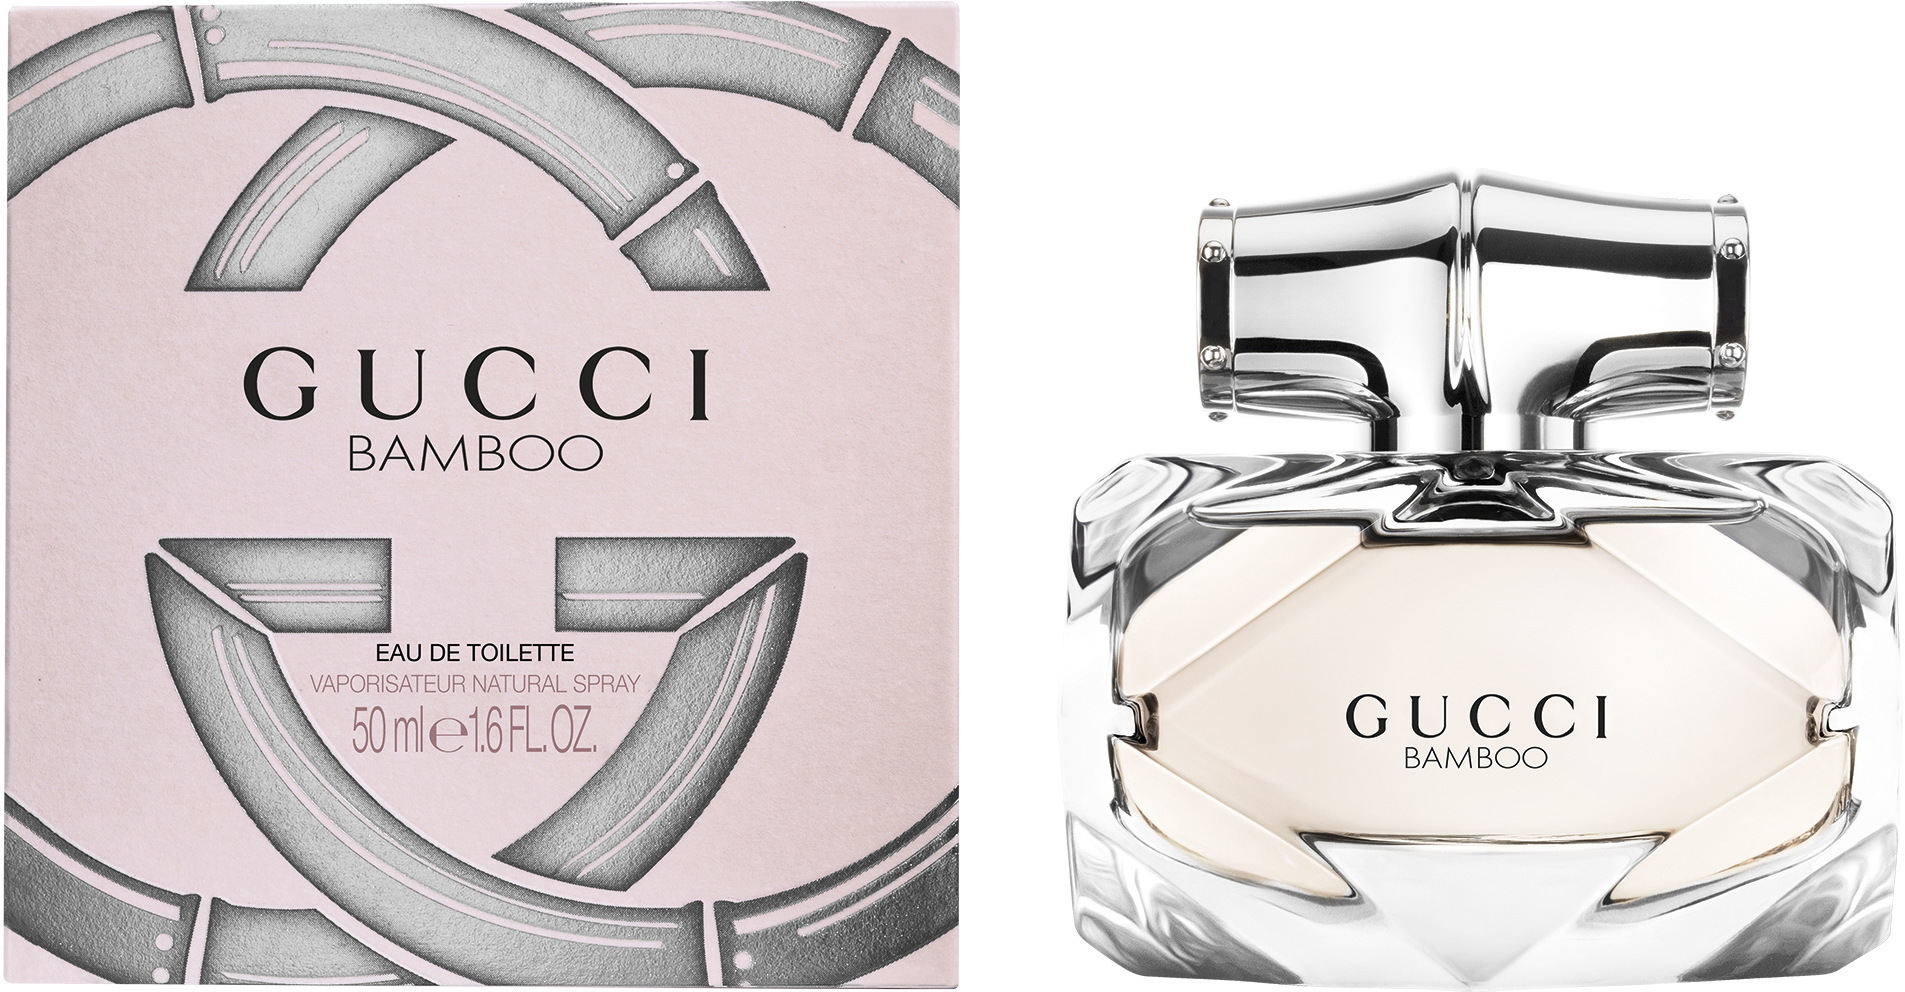 Gucci Bamboo EdT 50ml in duty-free at 